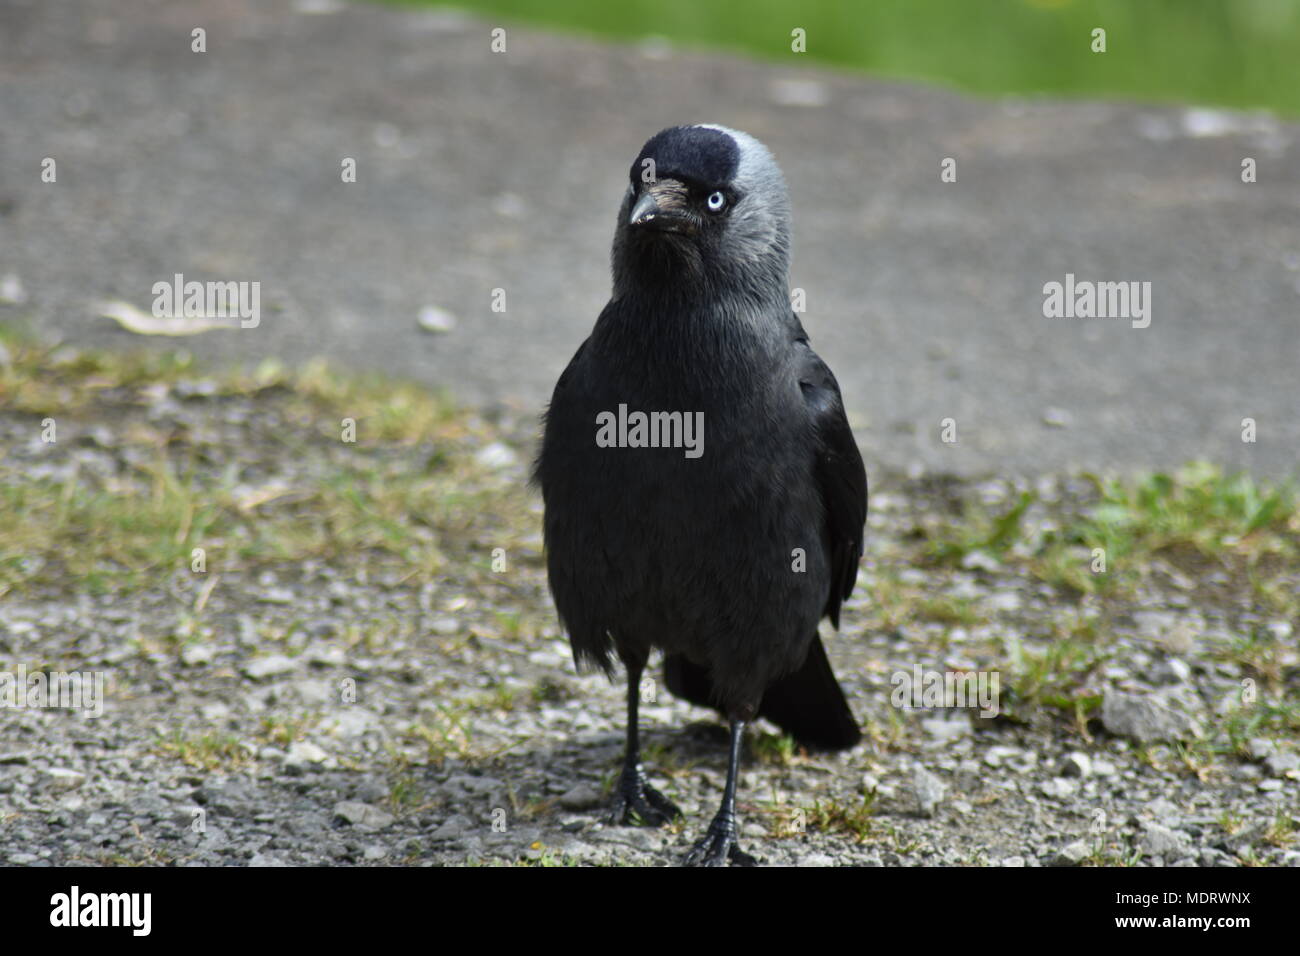 Crow at disused railway station Stock Photo